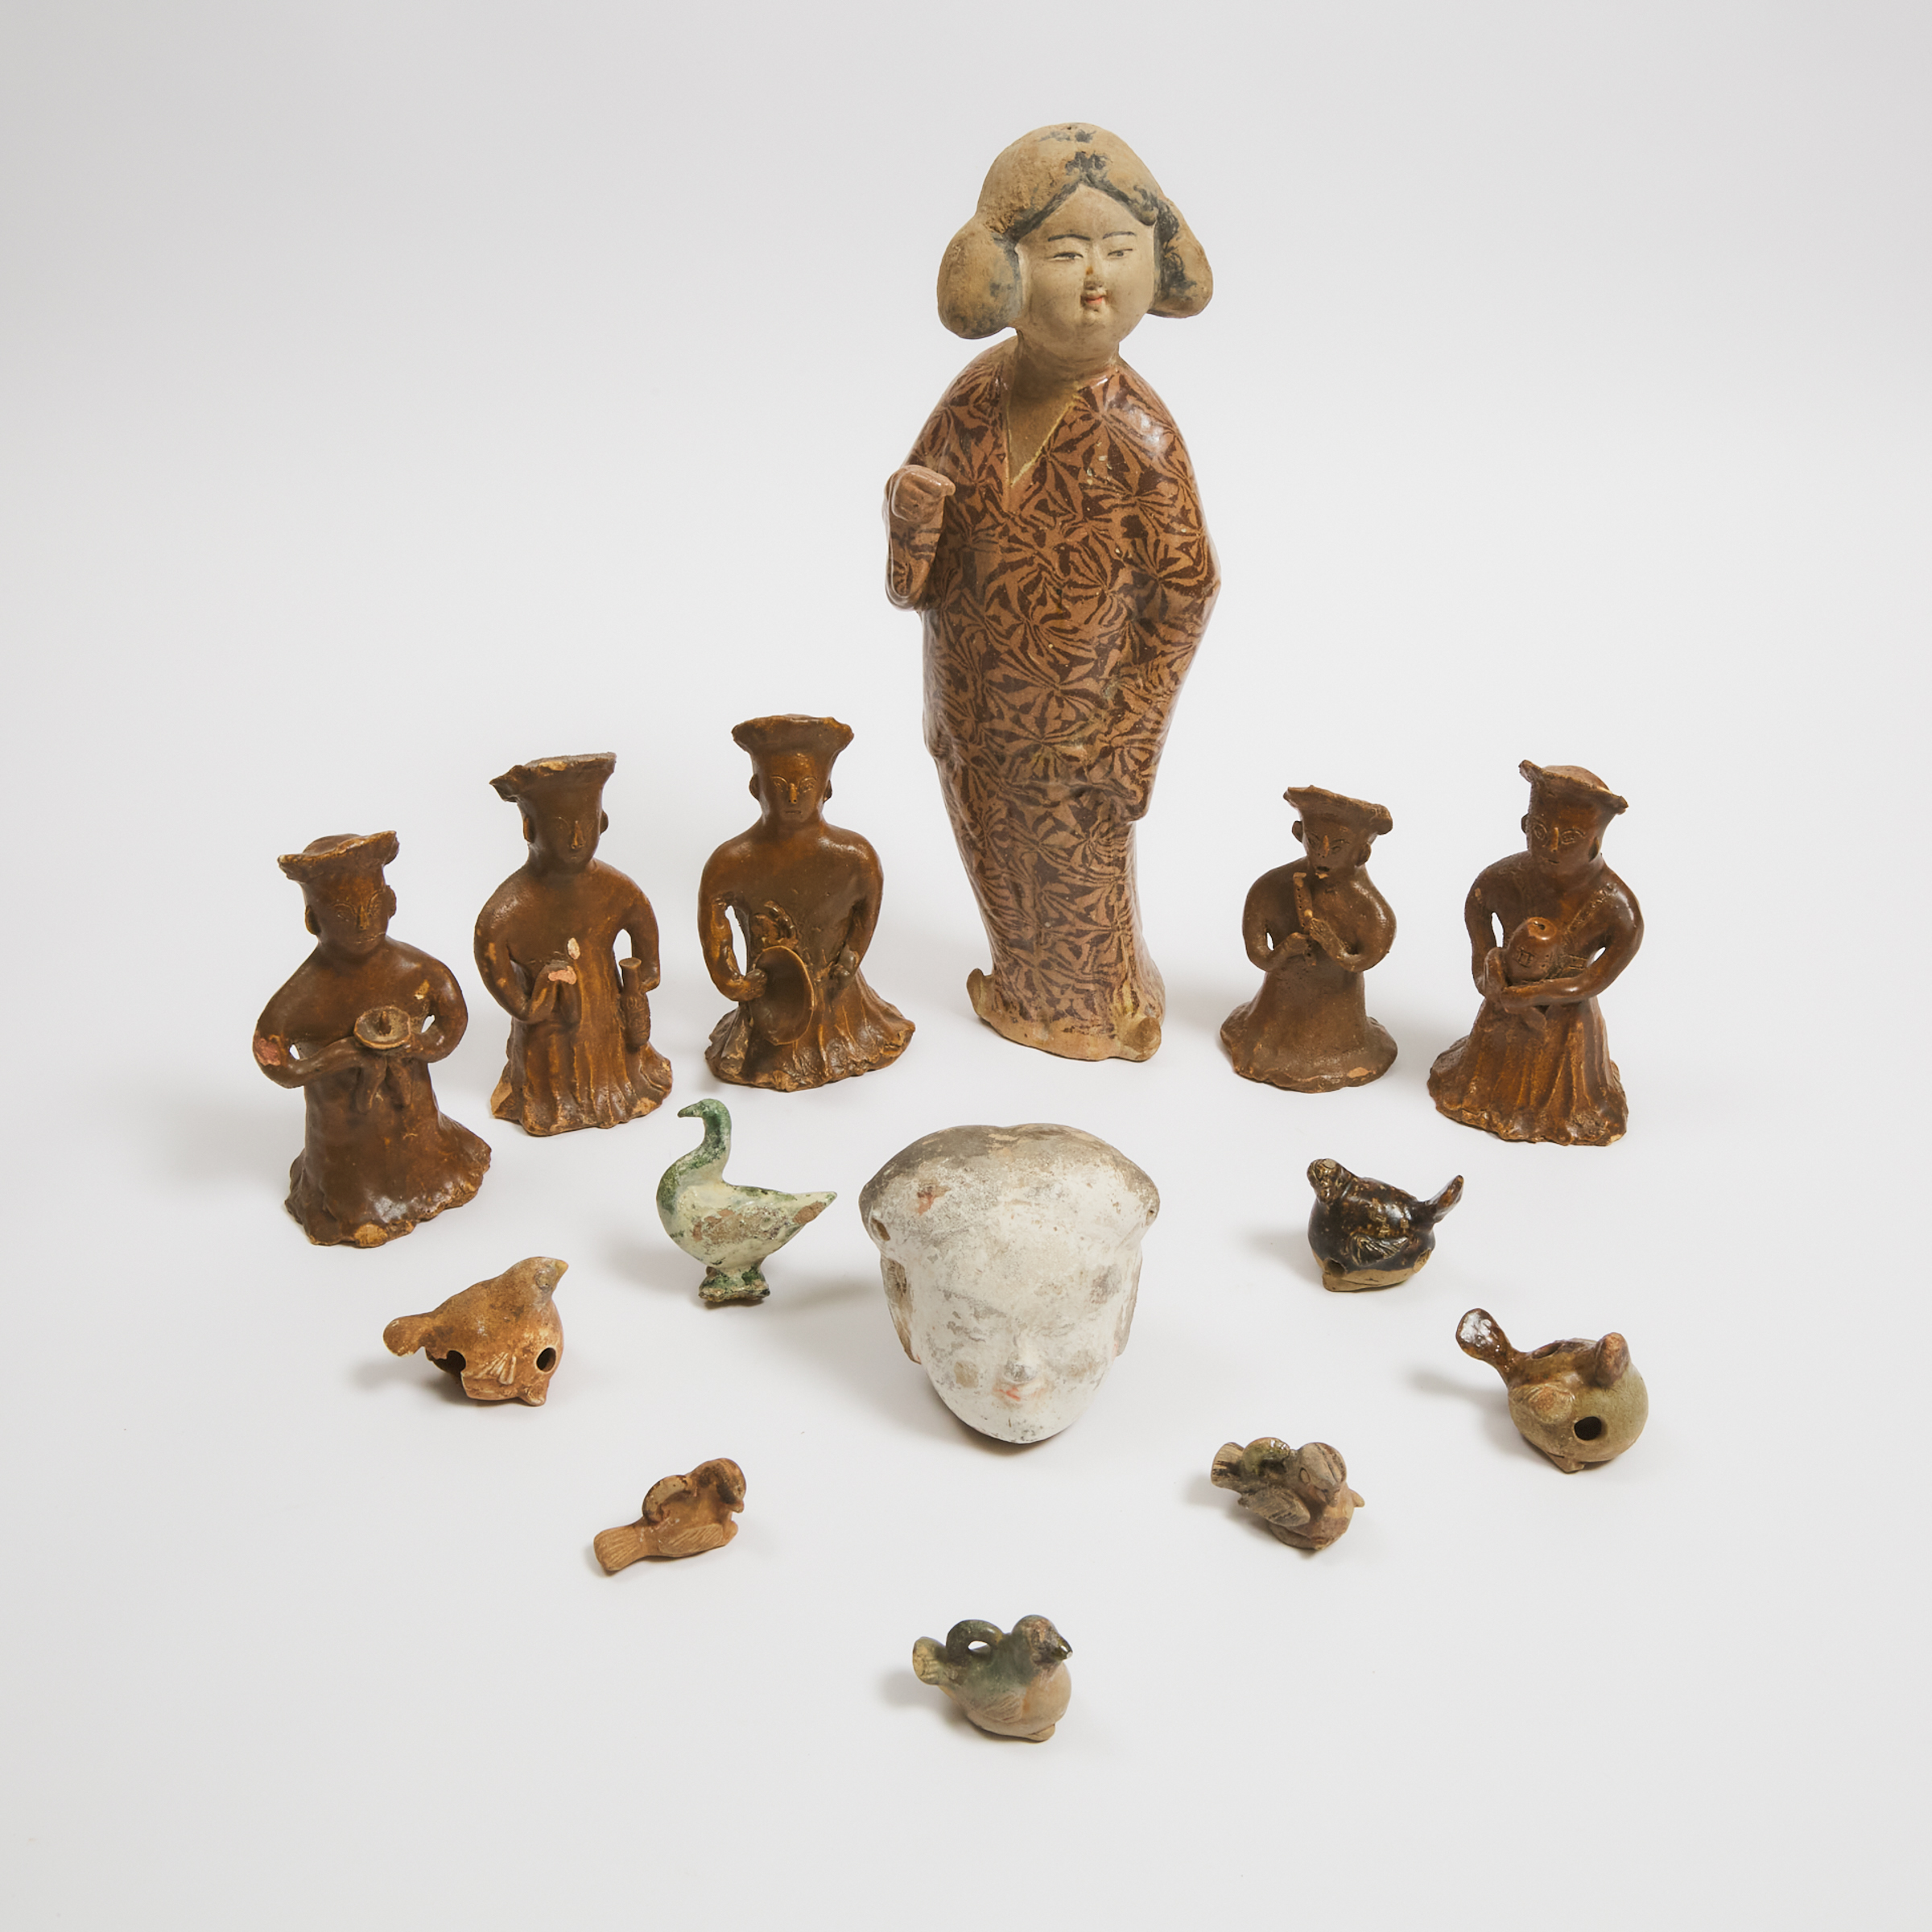 A Group of Fourteen Glazed Pottery Figures and Animals, Han Dynasty and Later